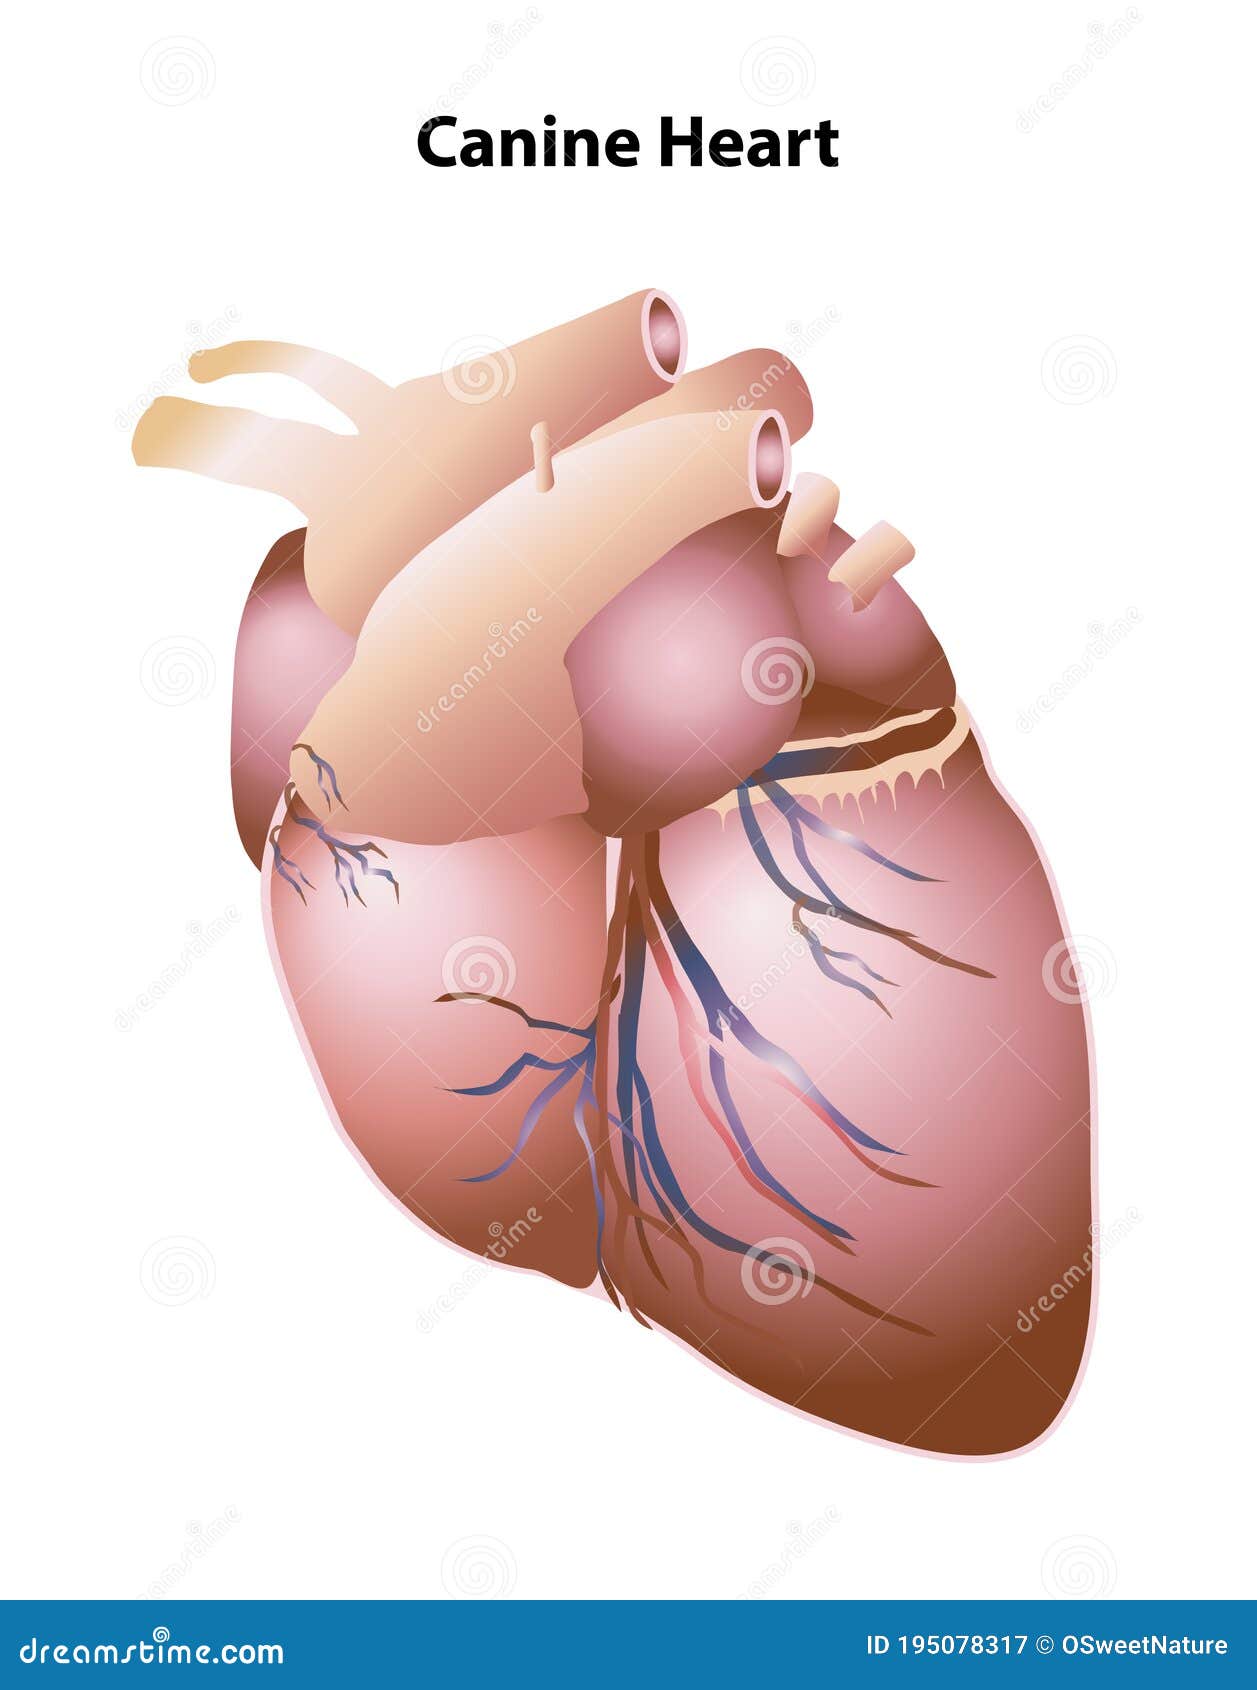 canine heart external structures and features